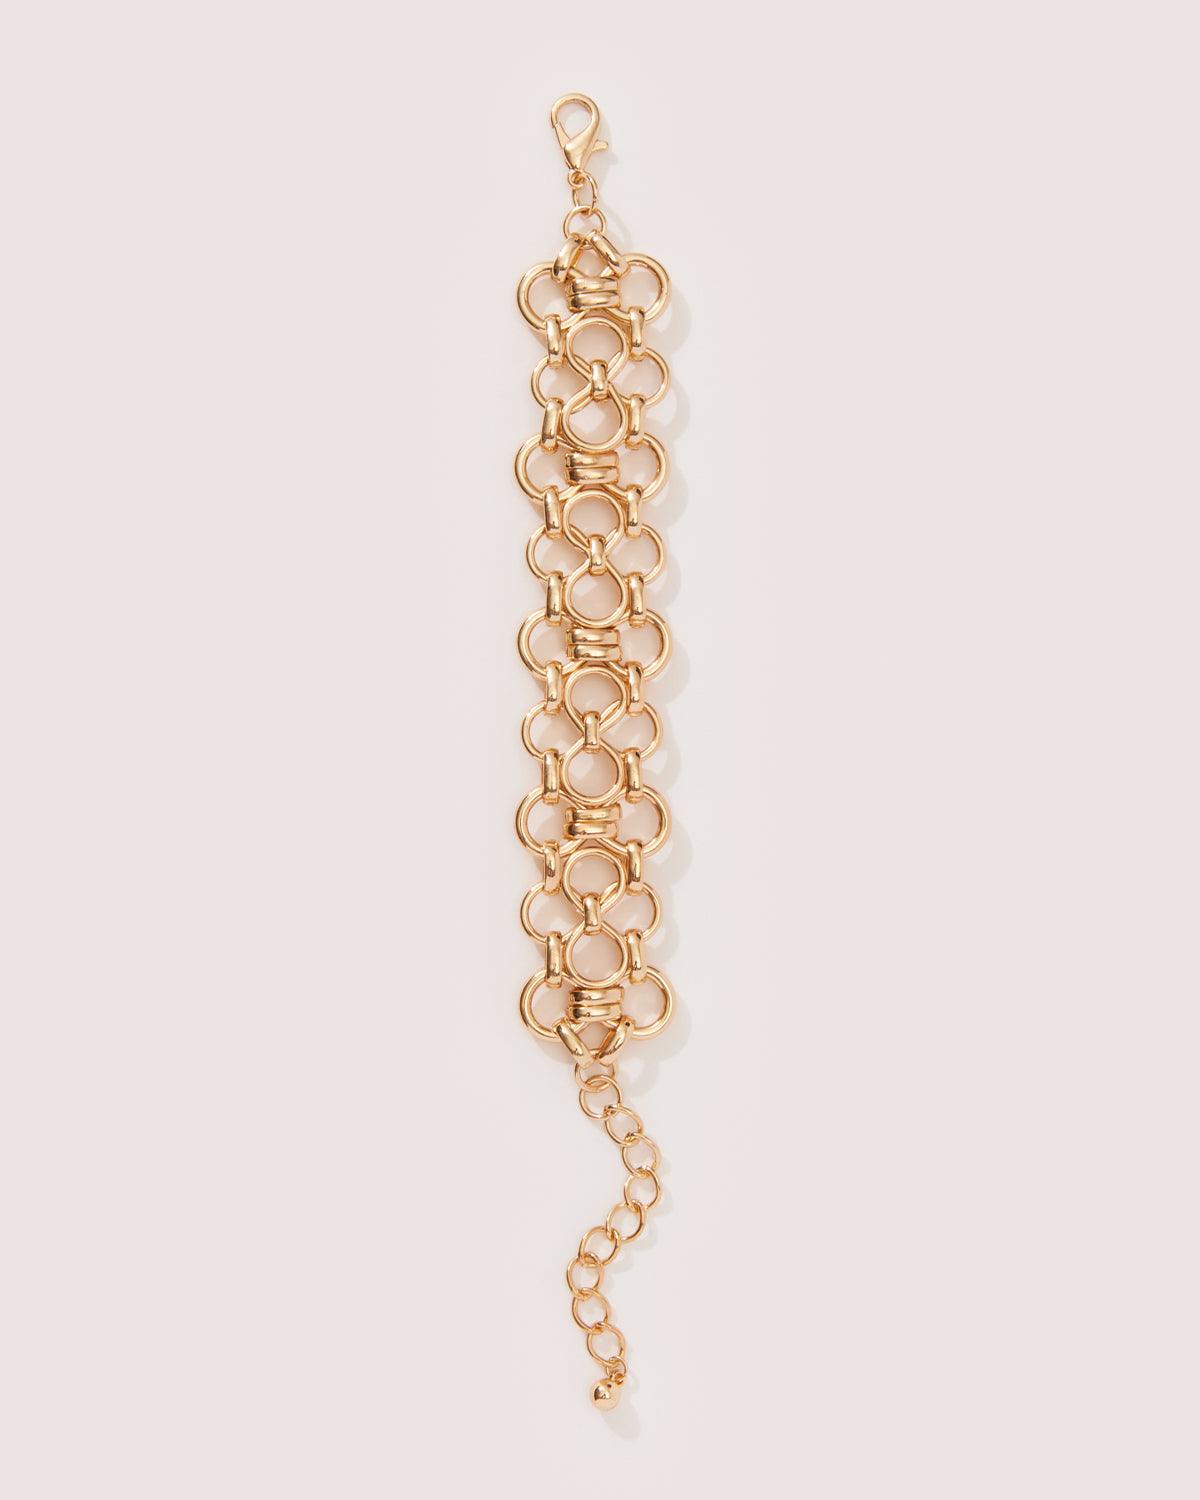 14k gold plated patterned flat chain bracelet, measuring 6.5 inches in length. Includes a 2.5 inch extender with a lobster clasp closure. 